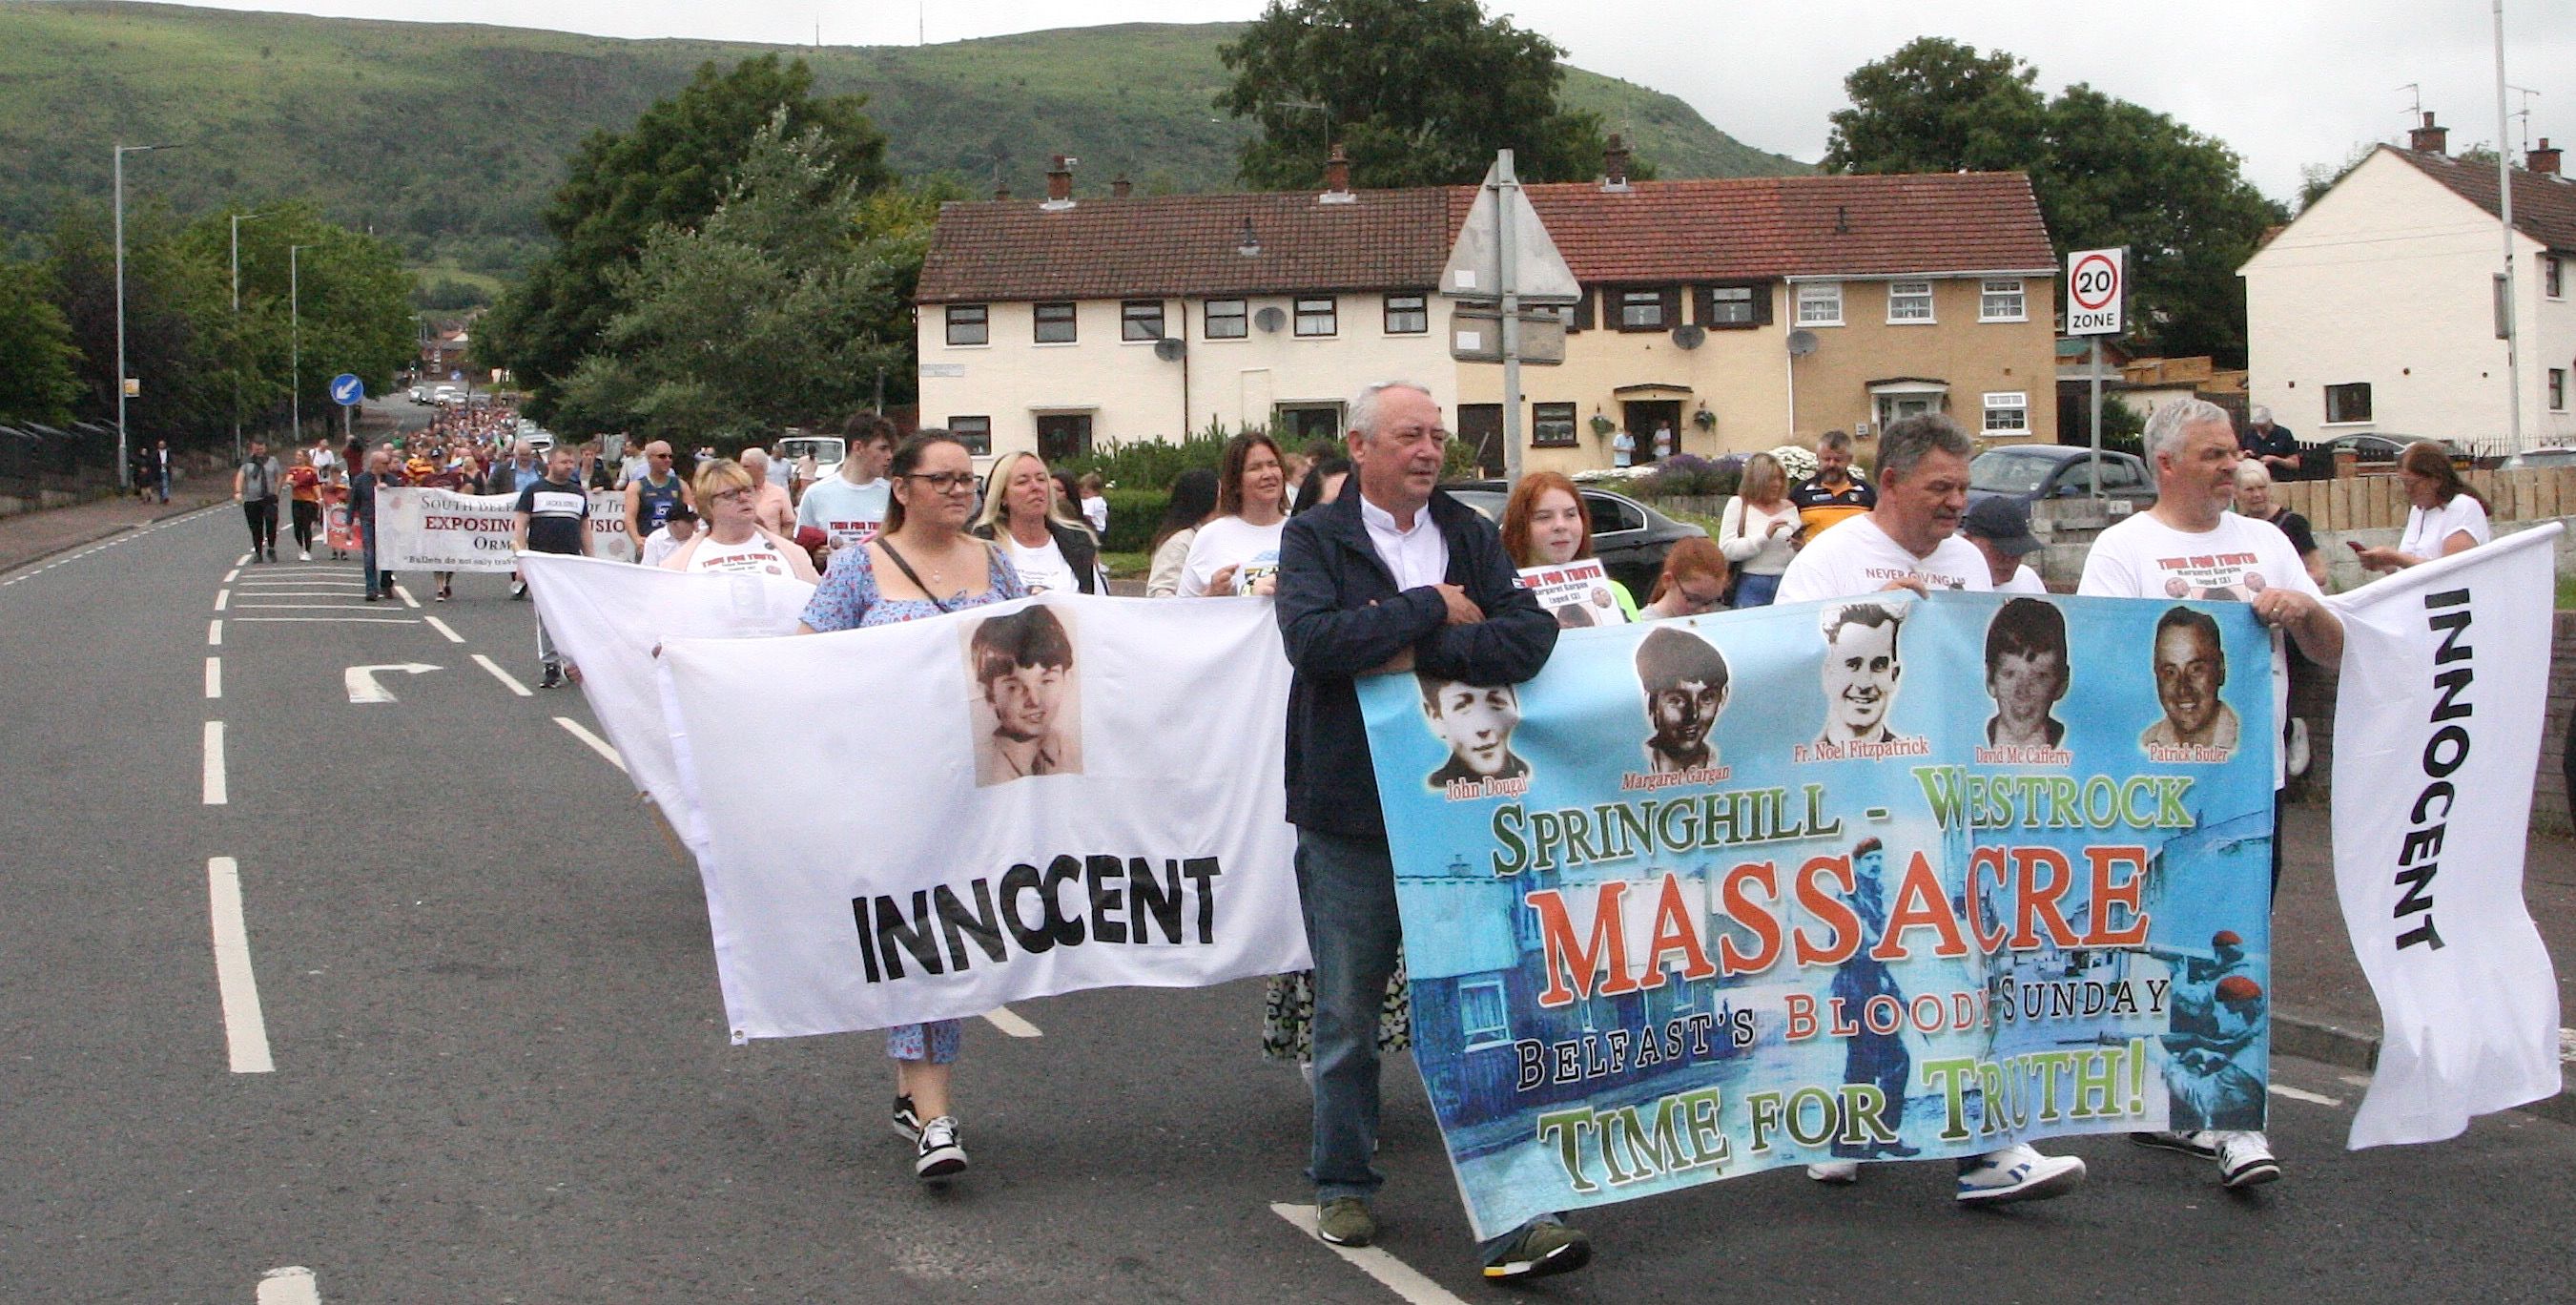 MEMORIES: Hundreds marched to mark the 50th anniversary of the Springhill-Westrock Massacre